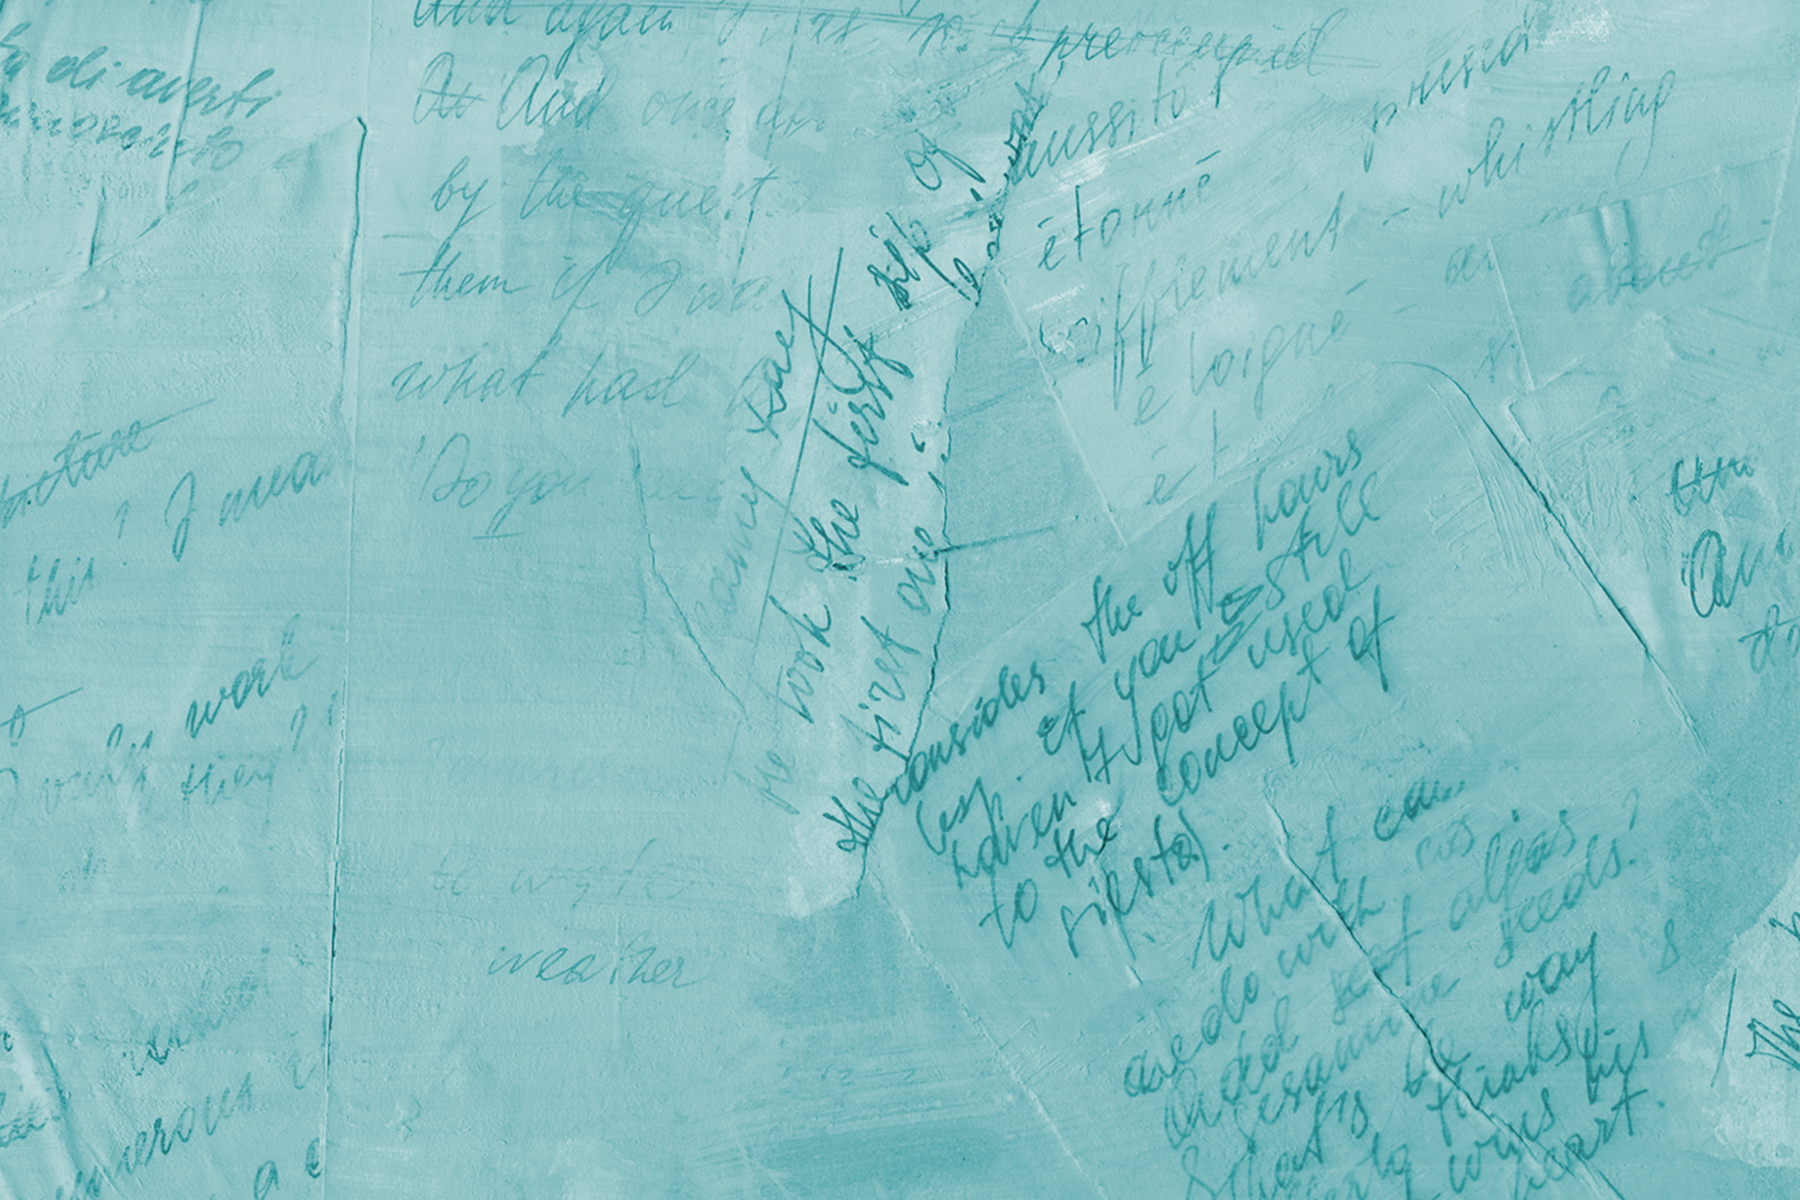 Sheets of paper with faded handwriting on them, with a blue tint over the whole image.